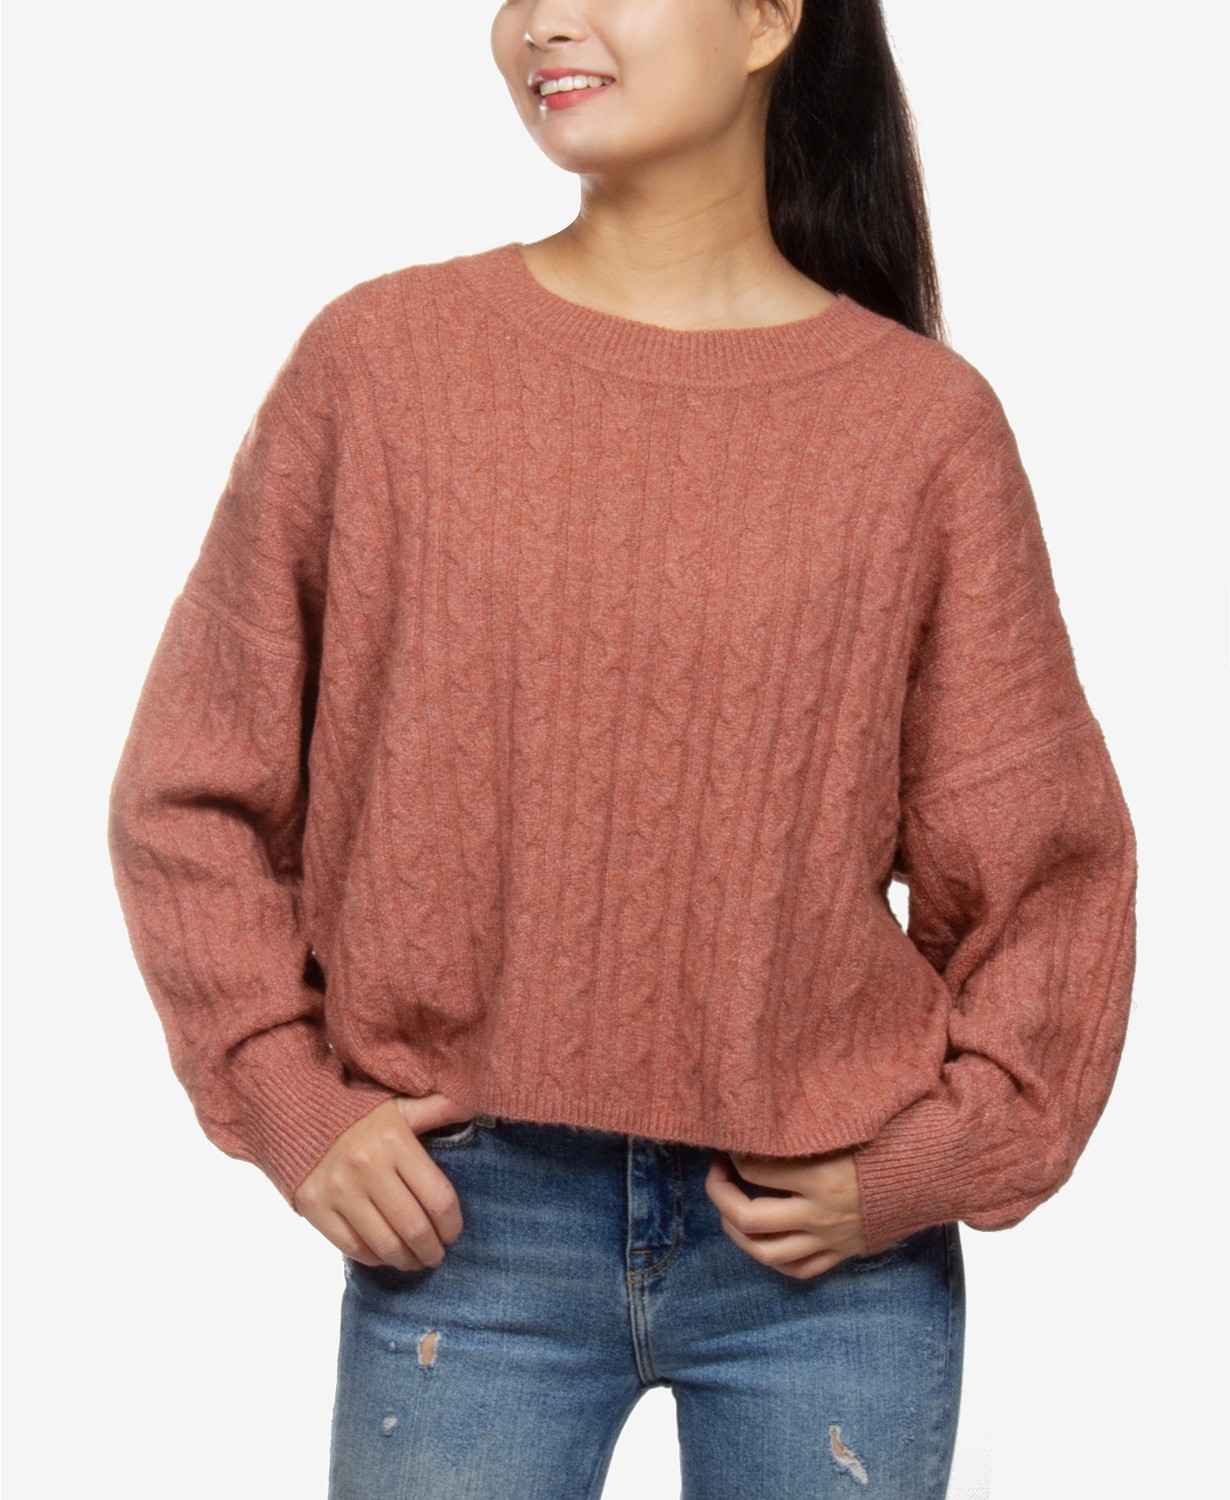 Juniors' Cable-Knit Sweater
